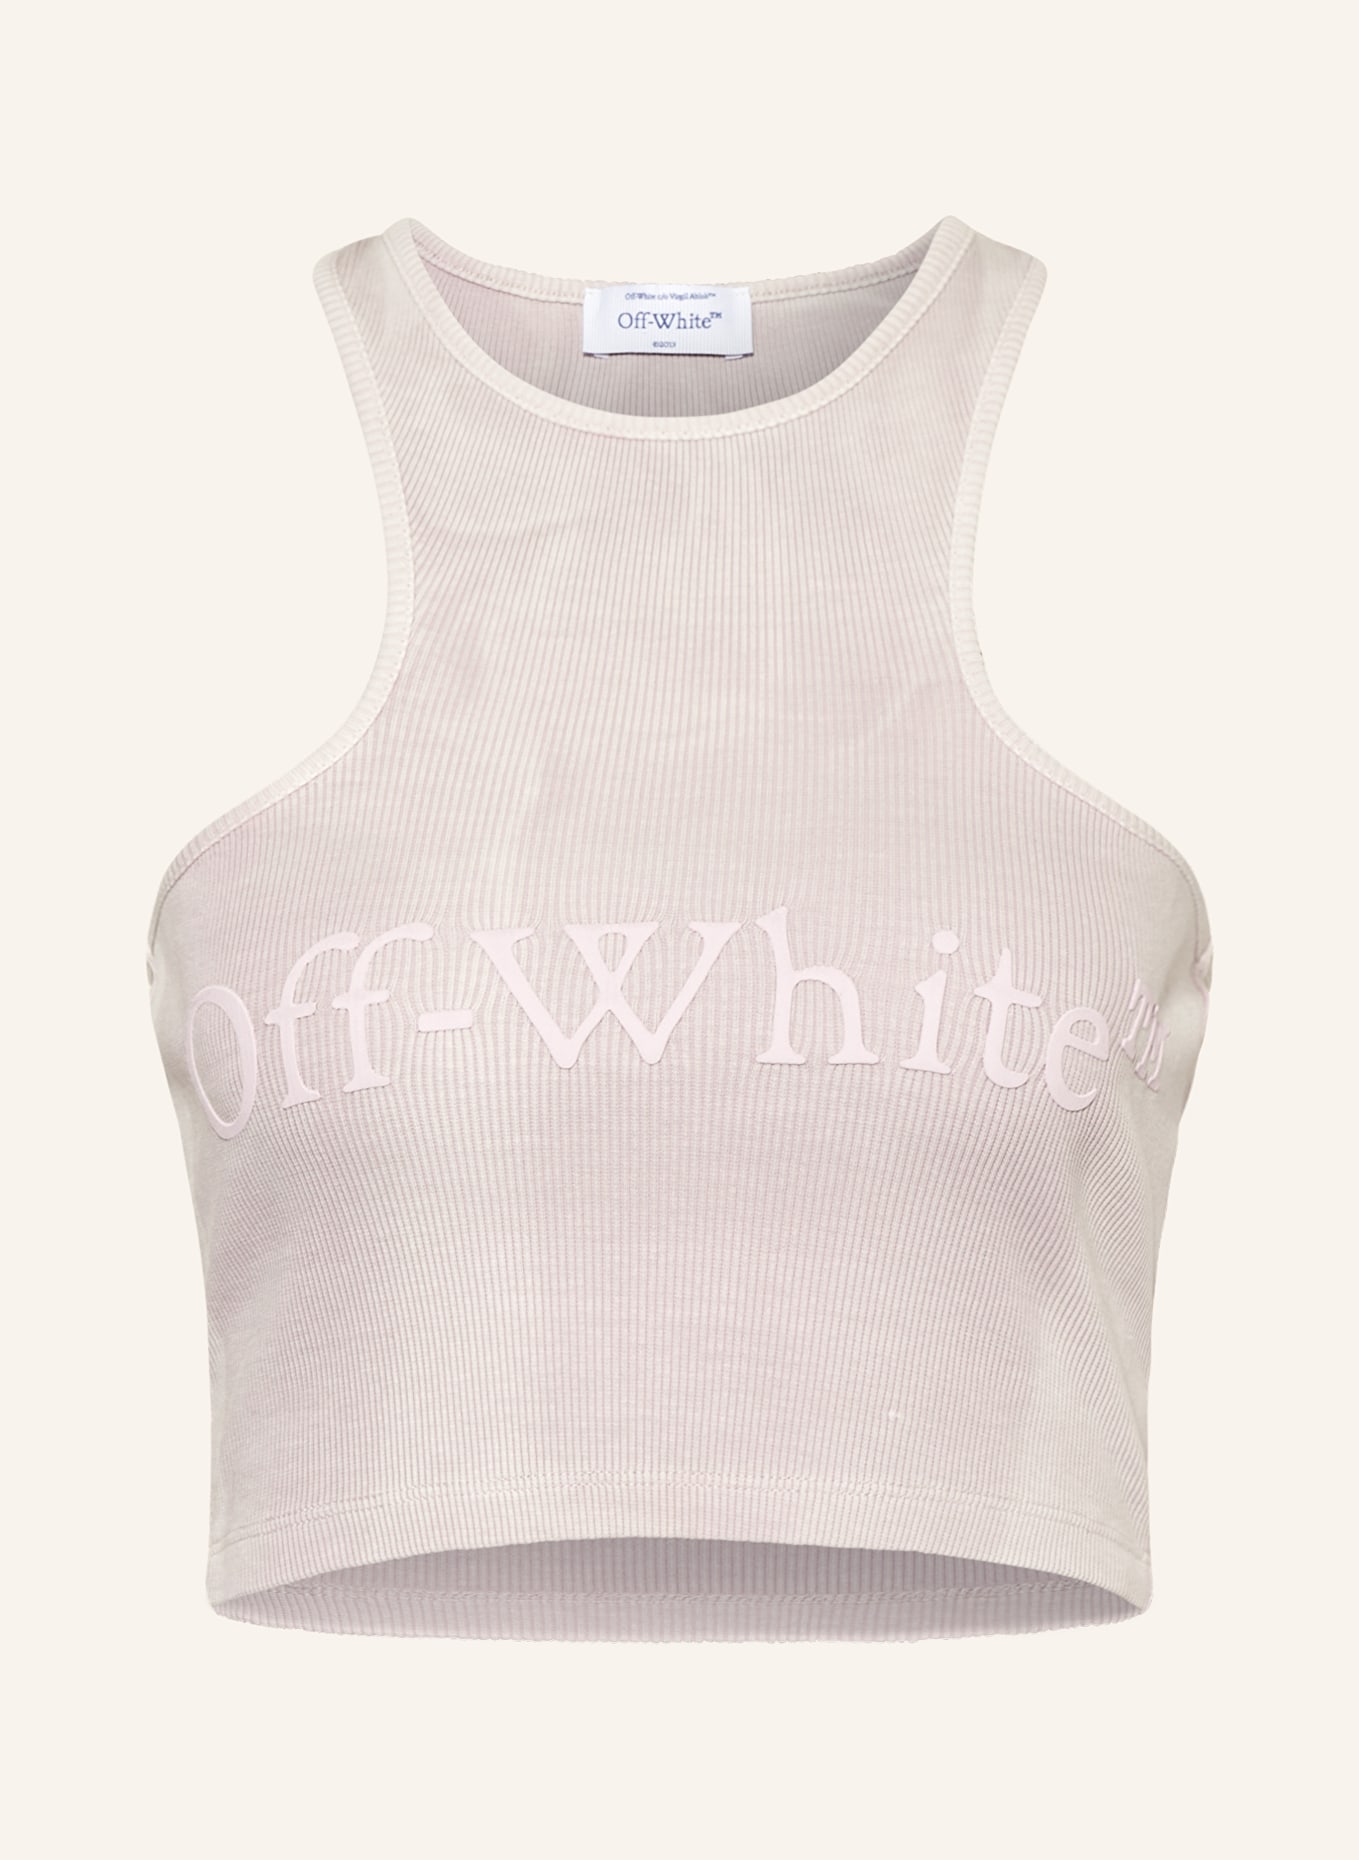 Off-White Cropped-Top LAUNDRY, Farbe: ROSÉ (Bild 1)